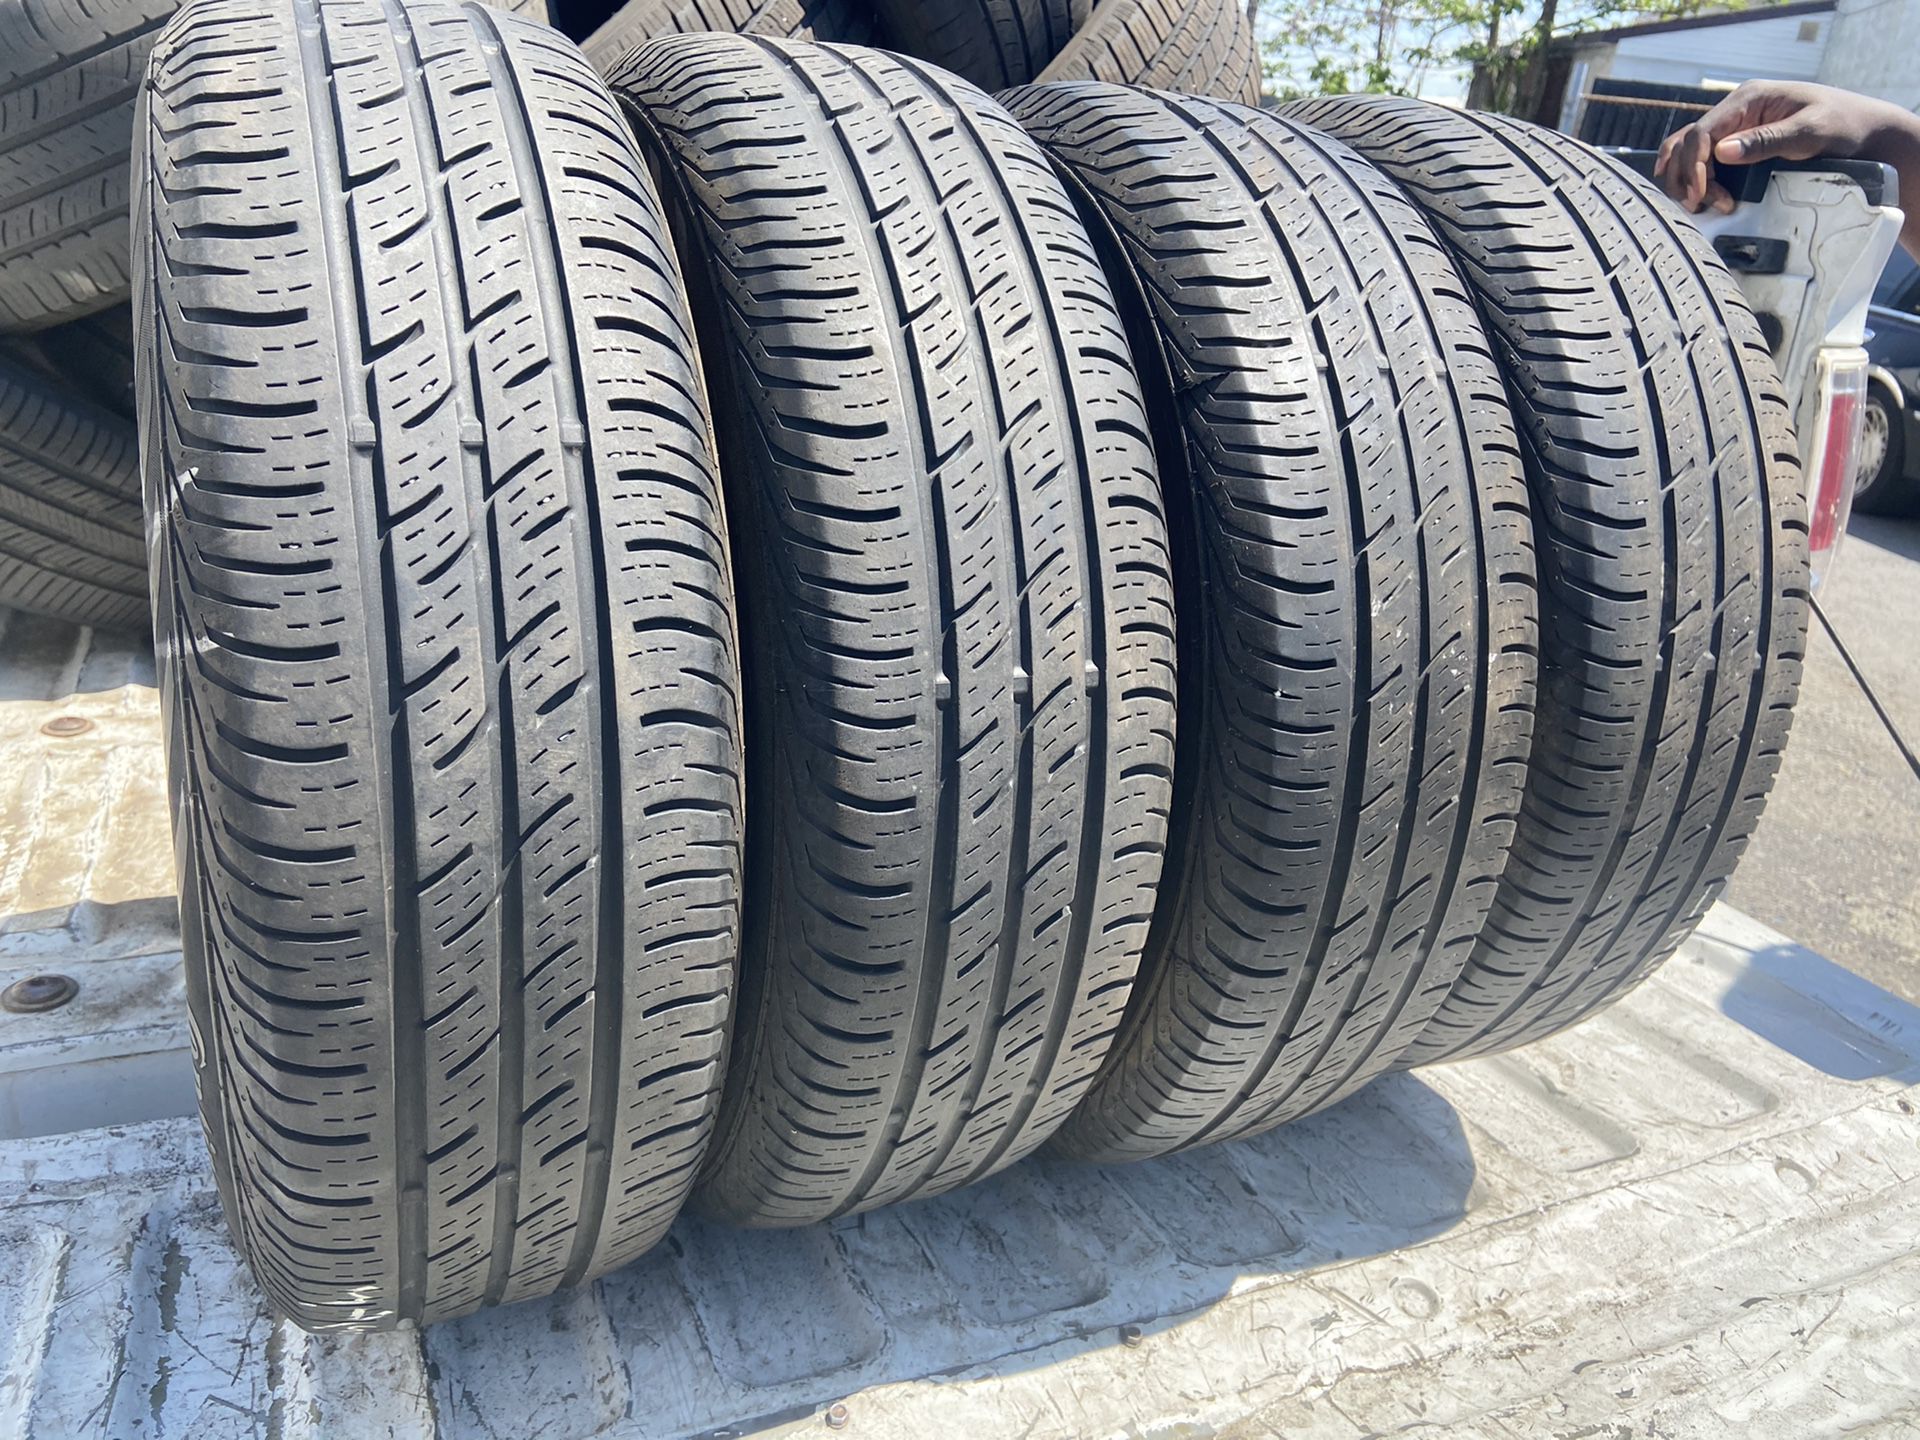 4 used 175/65/15 continental conti pro contact tires